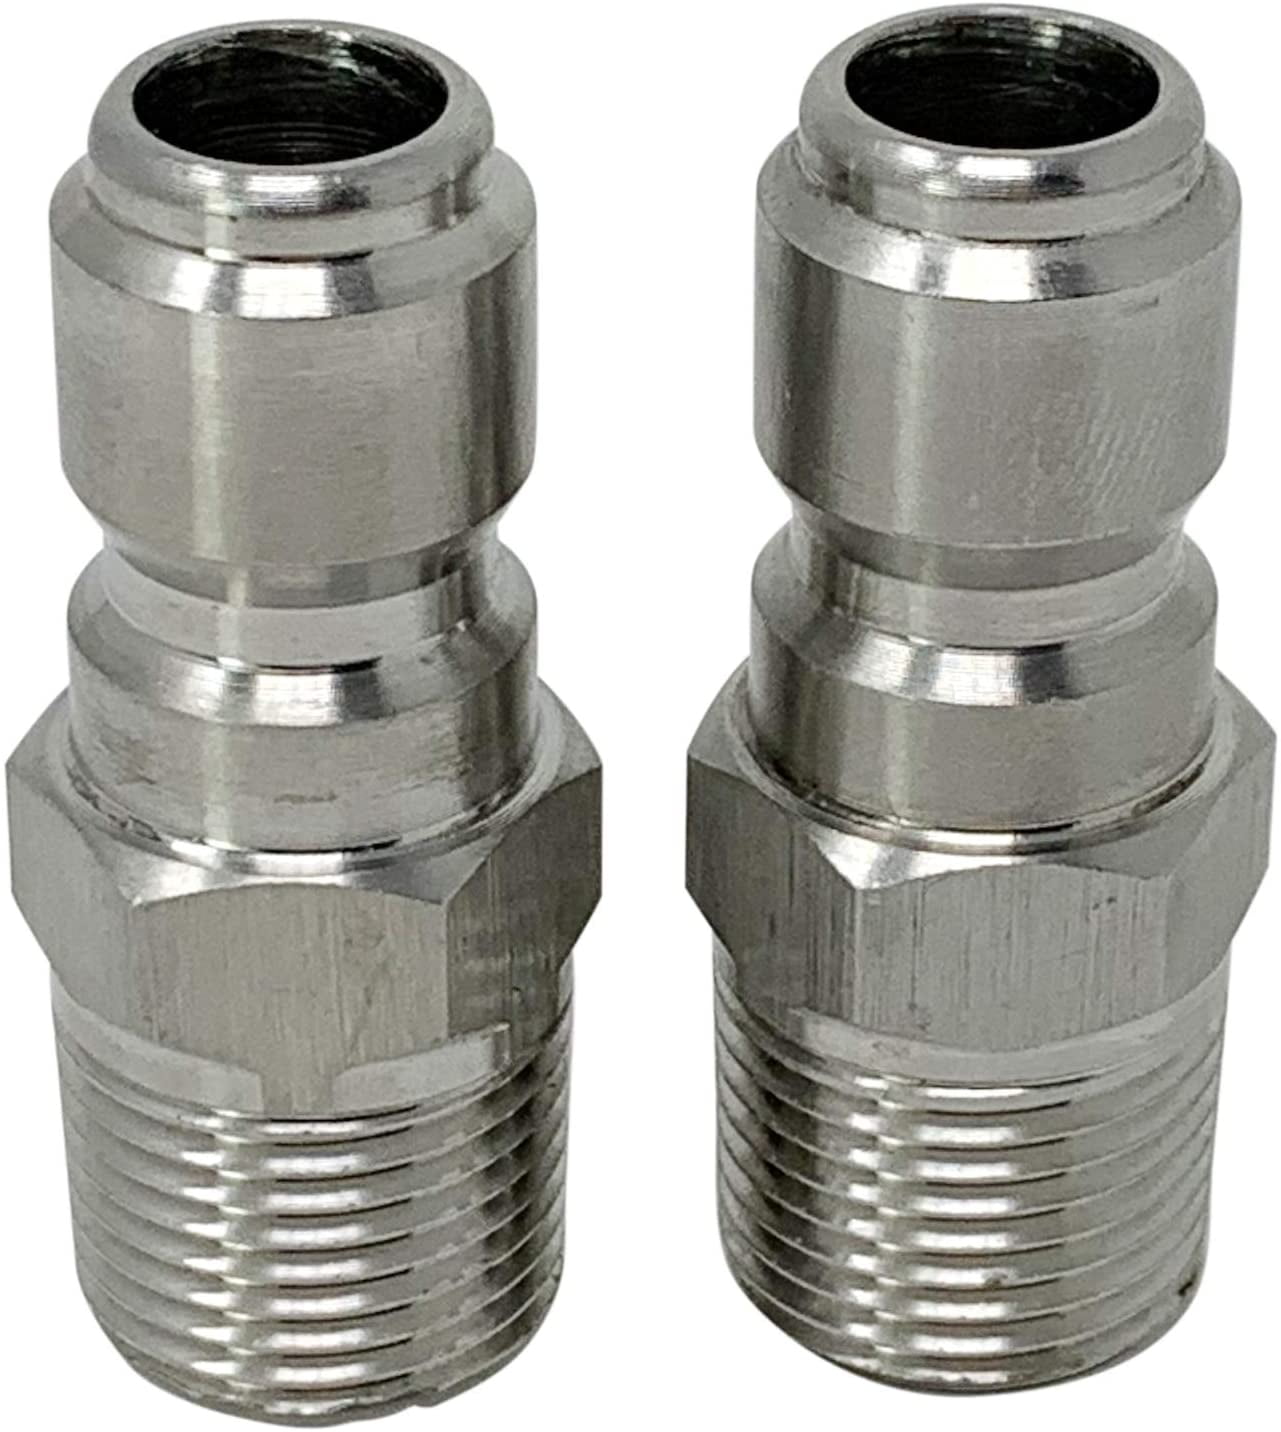 Foster 4 Series Quick Coupler Plug 3/8 Body 1/2 NPT Air and Water Hose Fittings